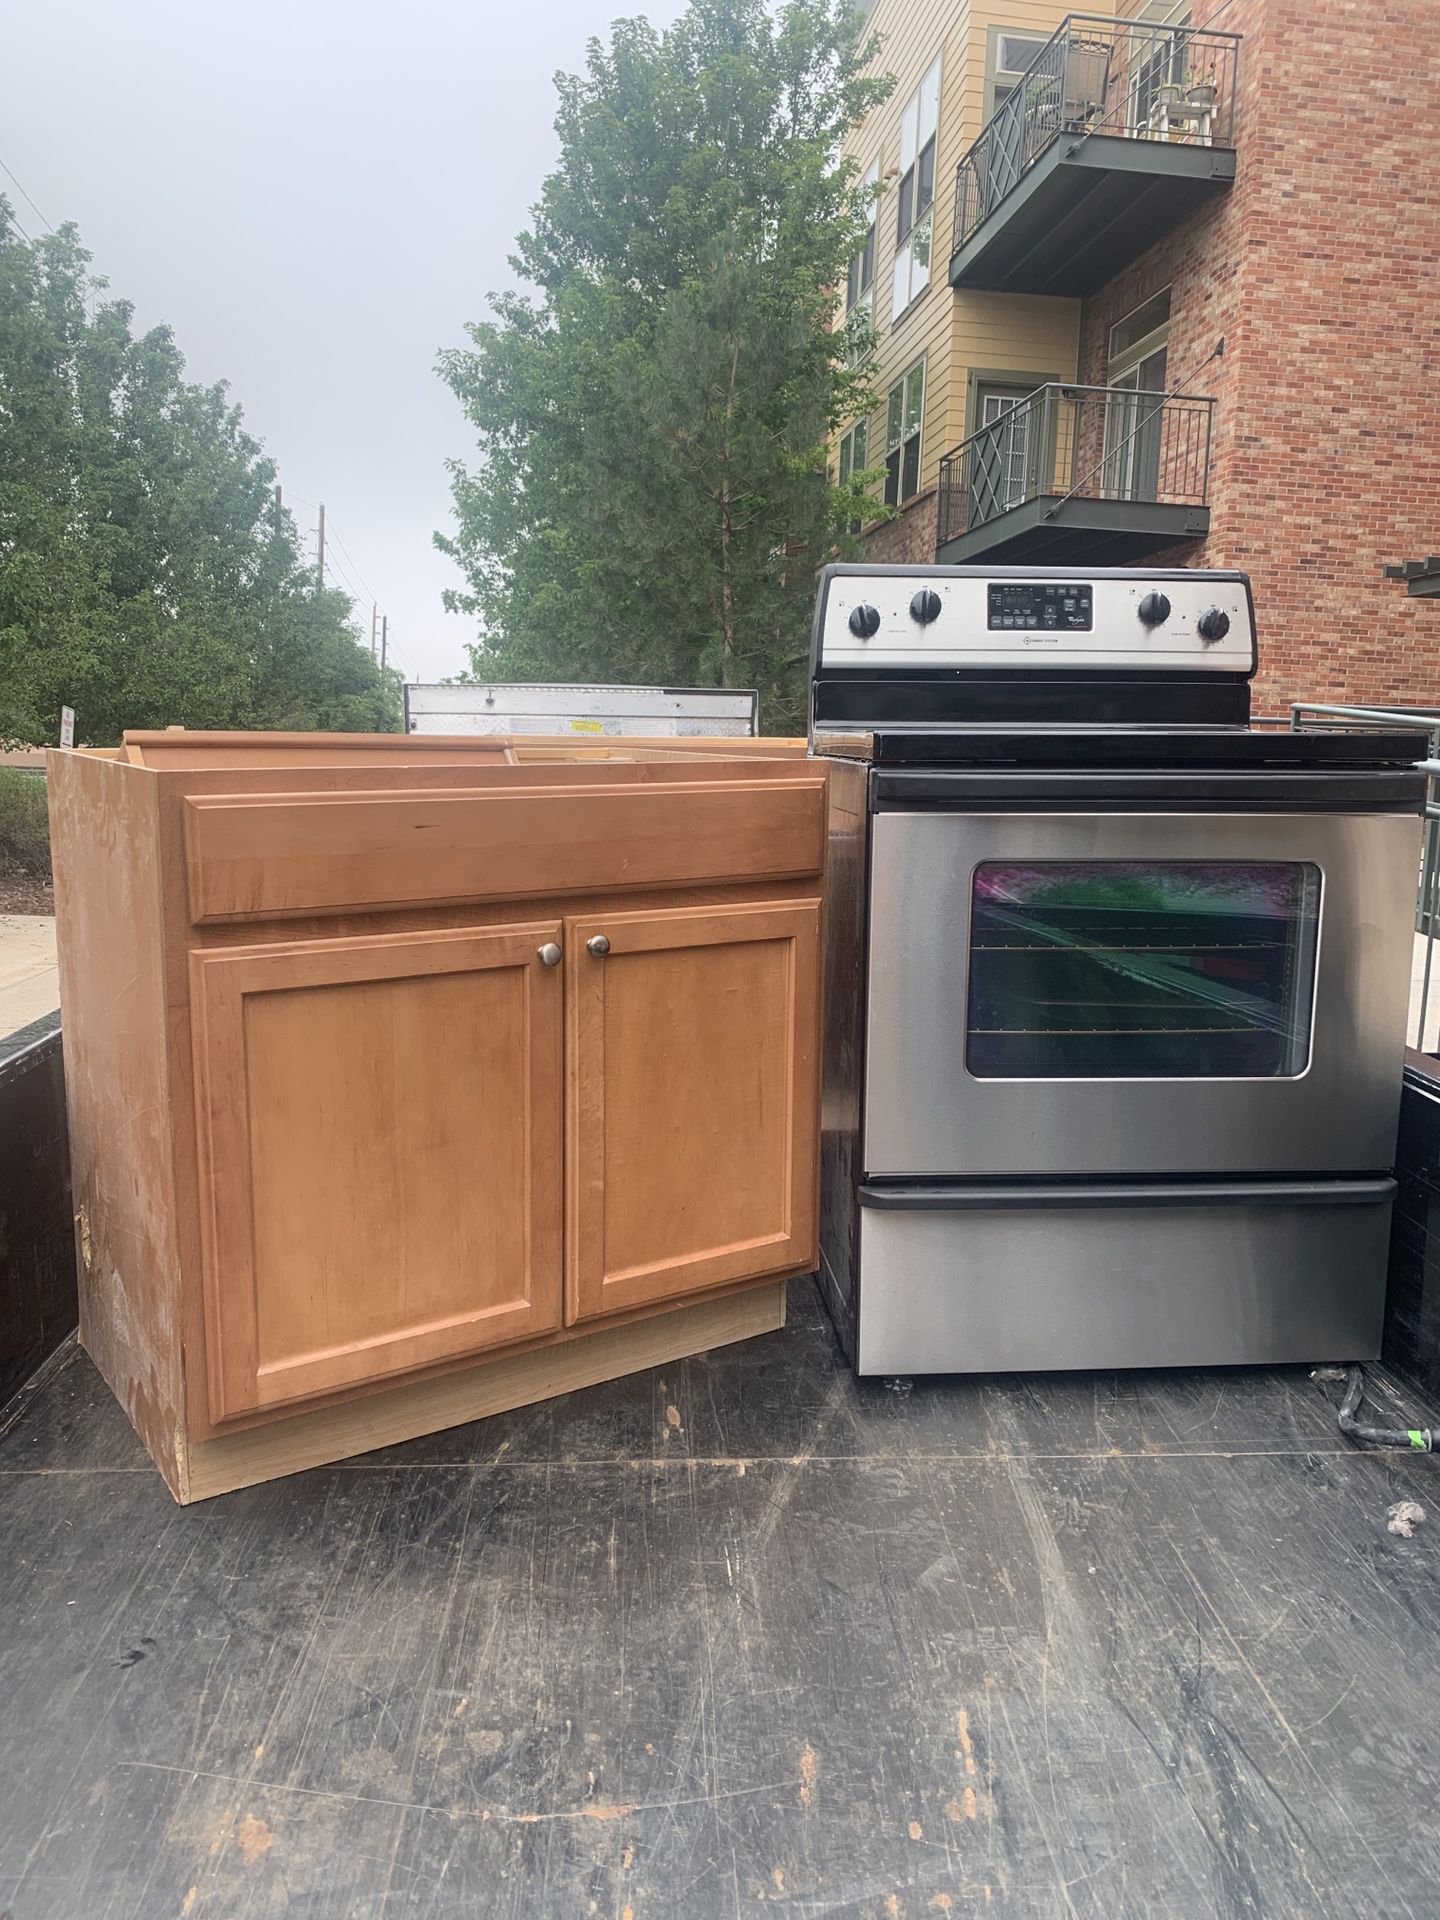 Kitchen cabinets plus electric range and microwave